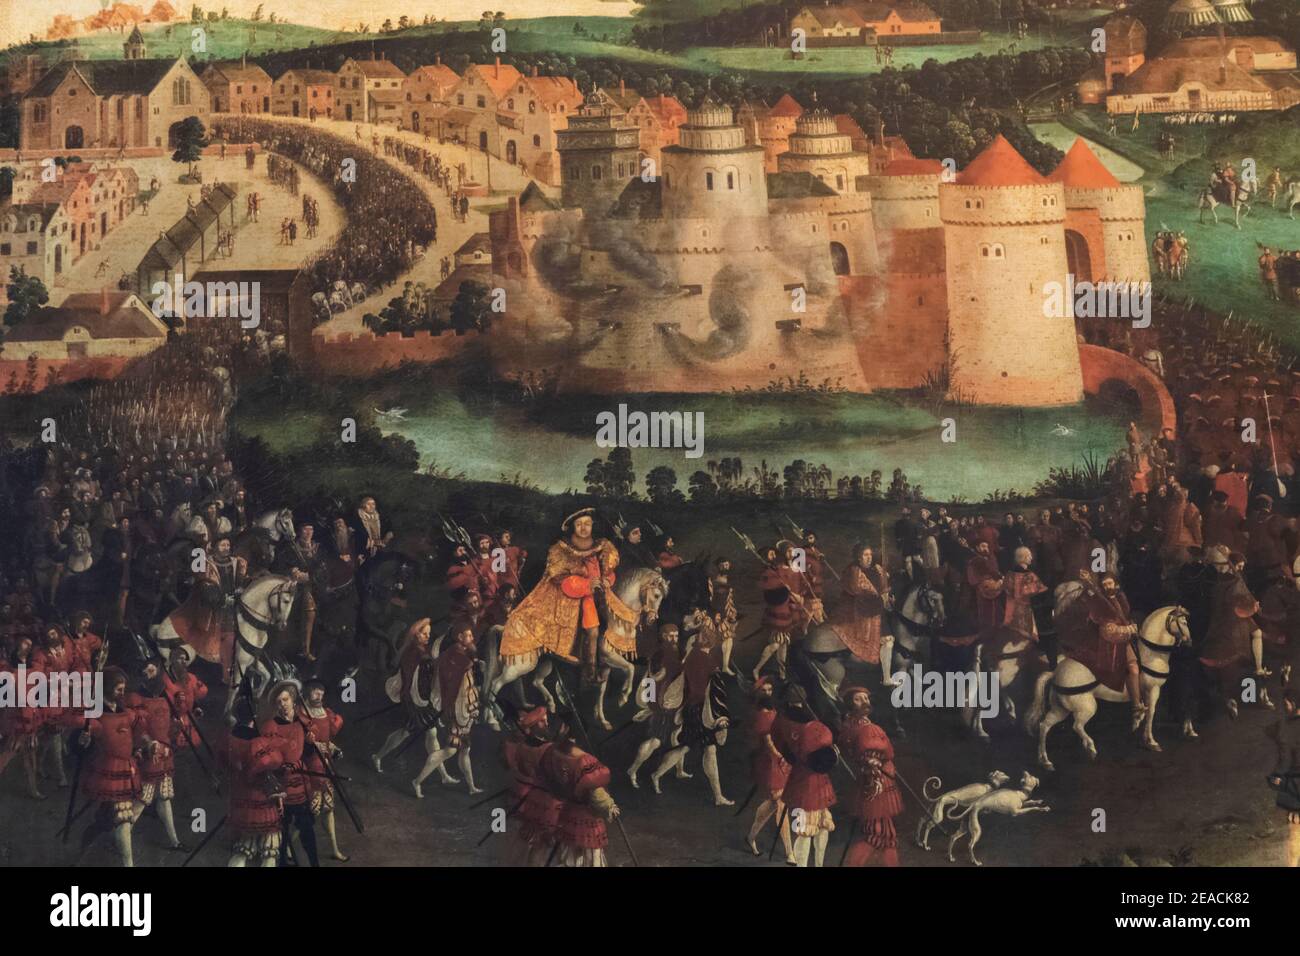 England, Kent, Leeds Castle, Painting of The Field of Cloth of Gold showing The Summit Meeting Between Henry VIII and Francis I of France in Ballinghem France Stock Photo